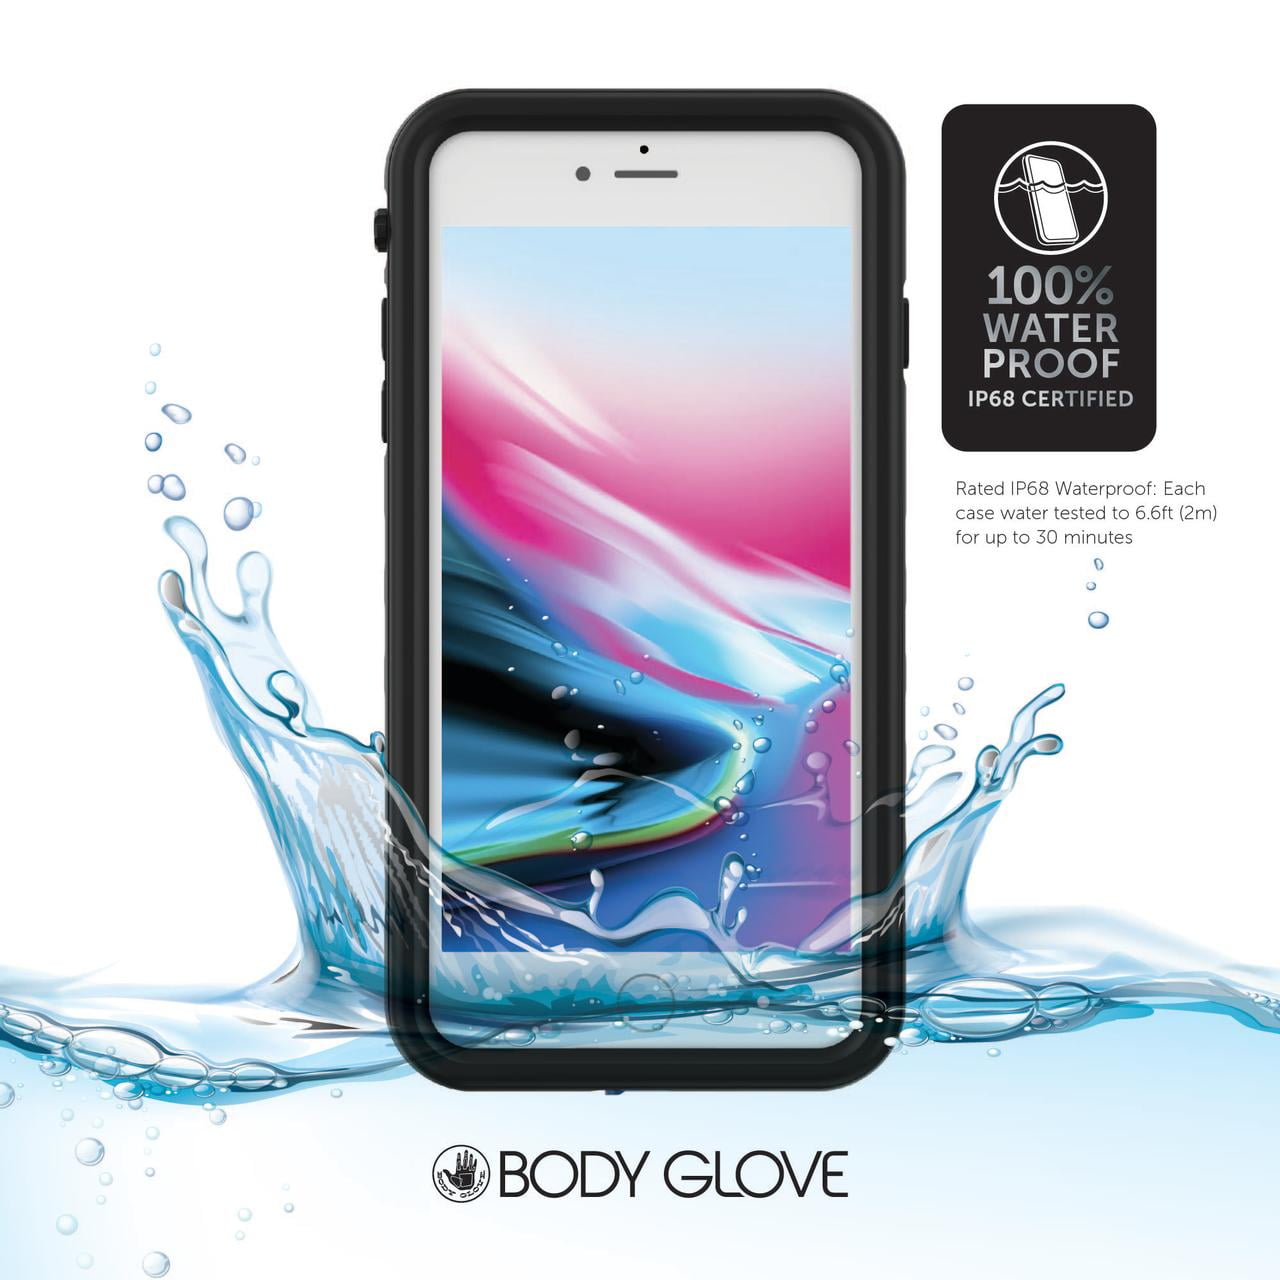 Body Glove Tidal Waterproof Phone Case for iPhone 7 Plus / iPhone